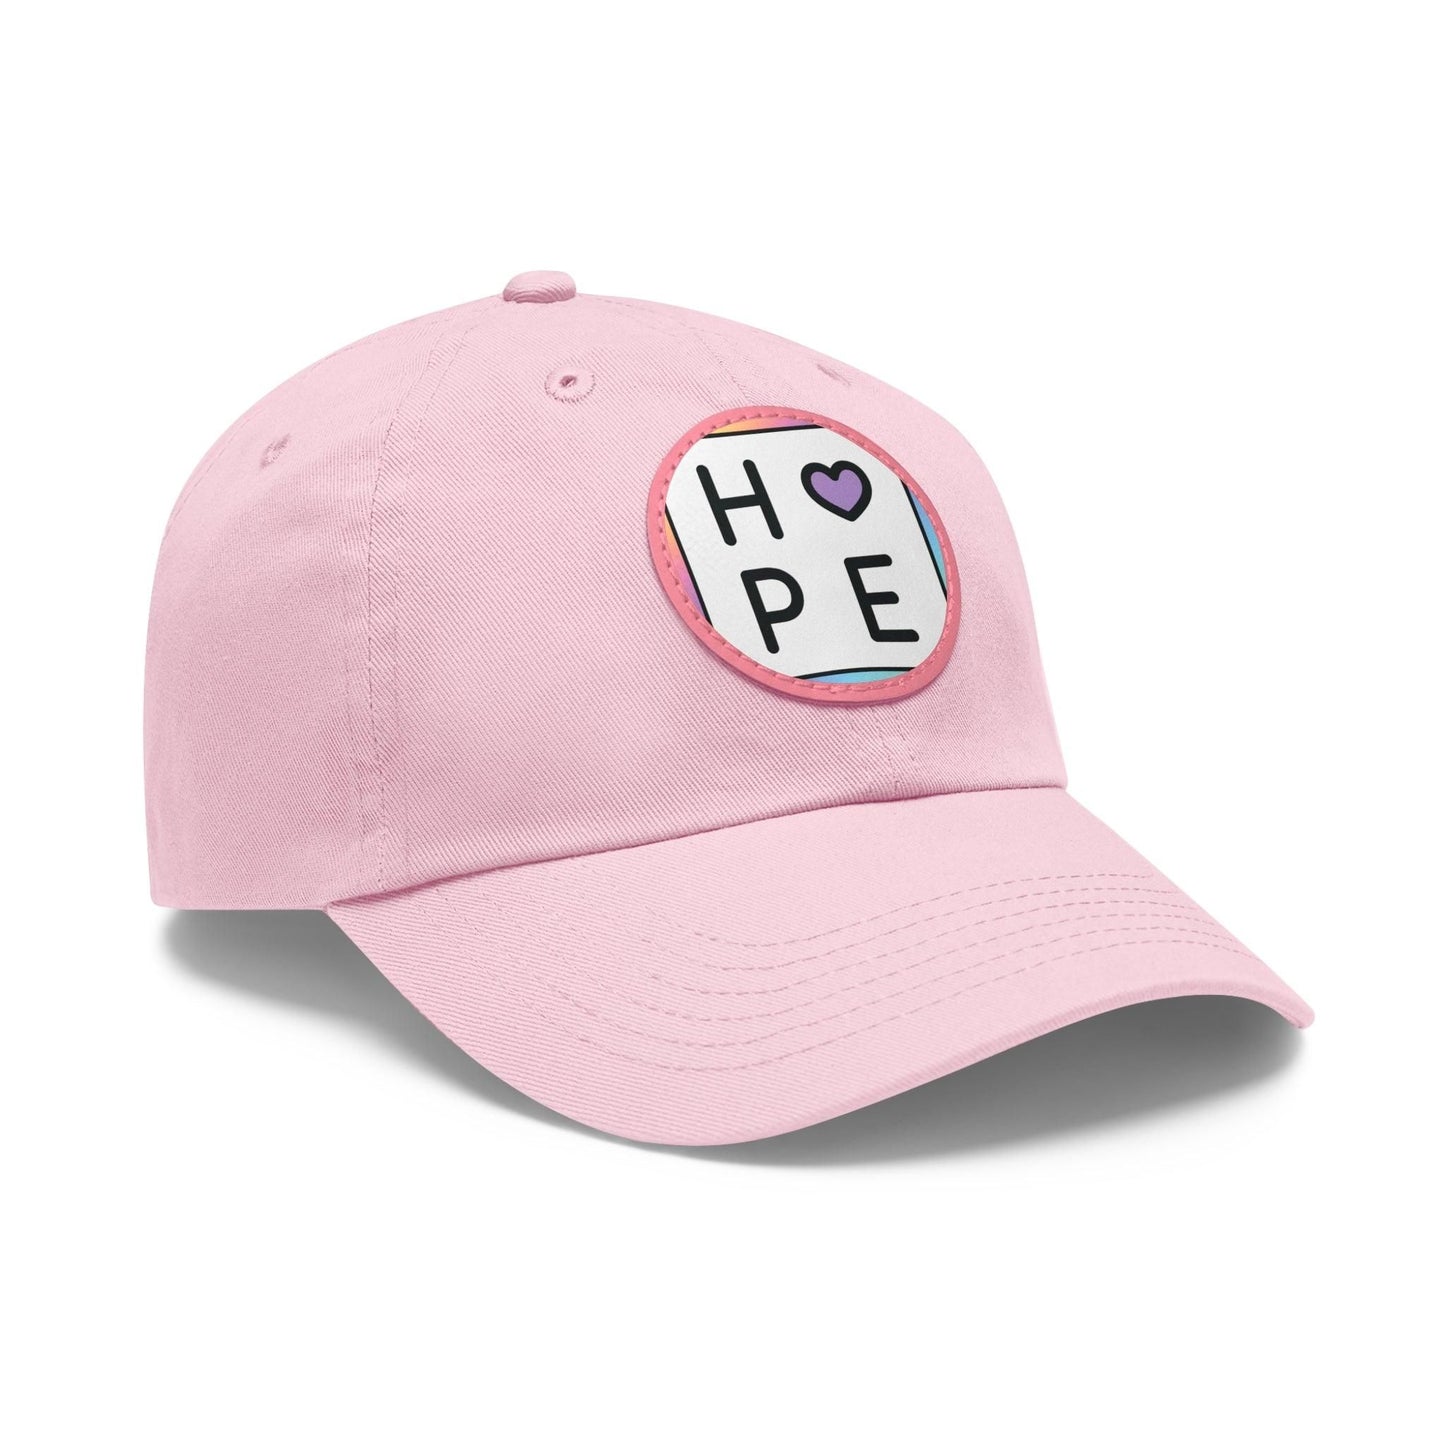 Hope Baseball Cap with Leather Patch Cap Light Pink / Pink patch Circle One size